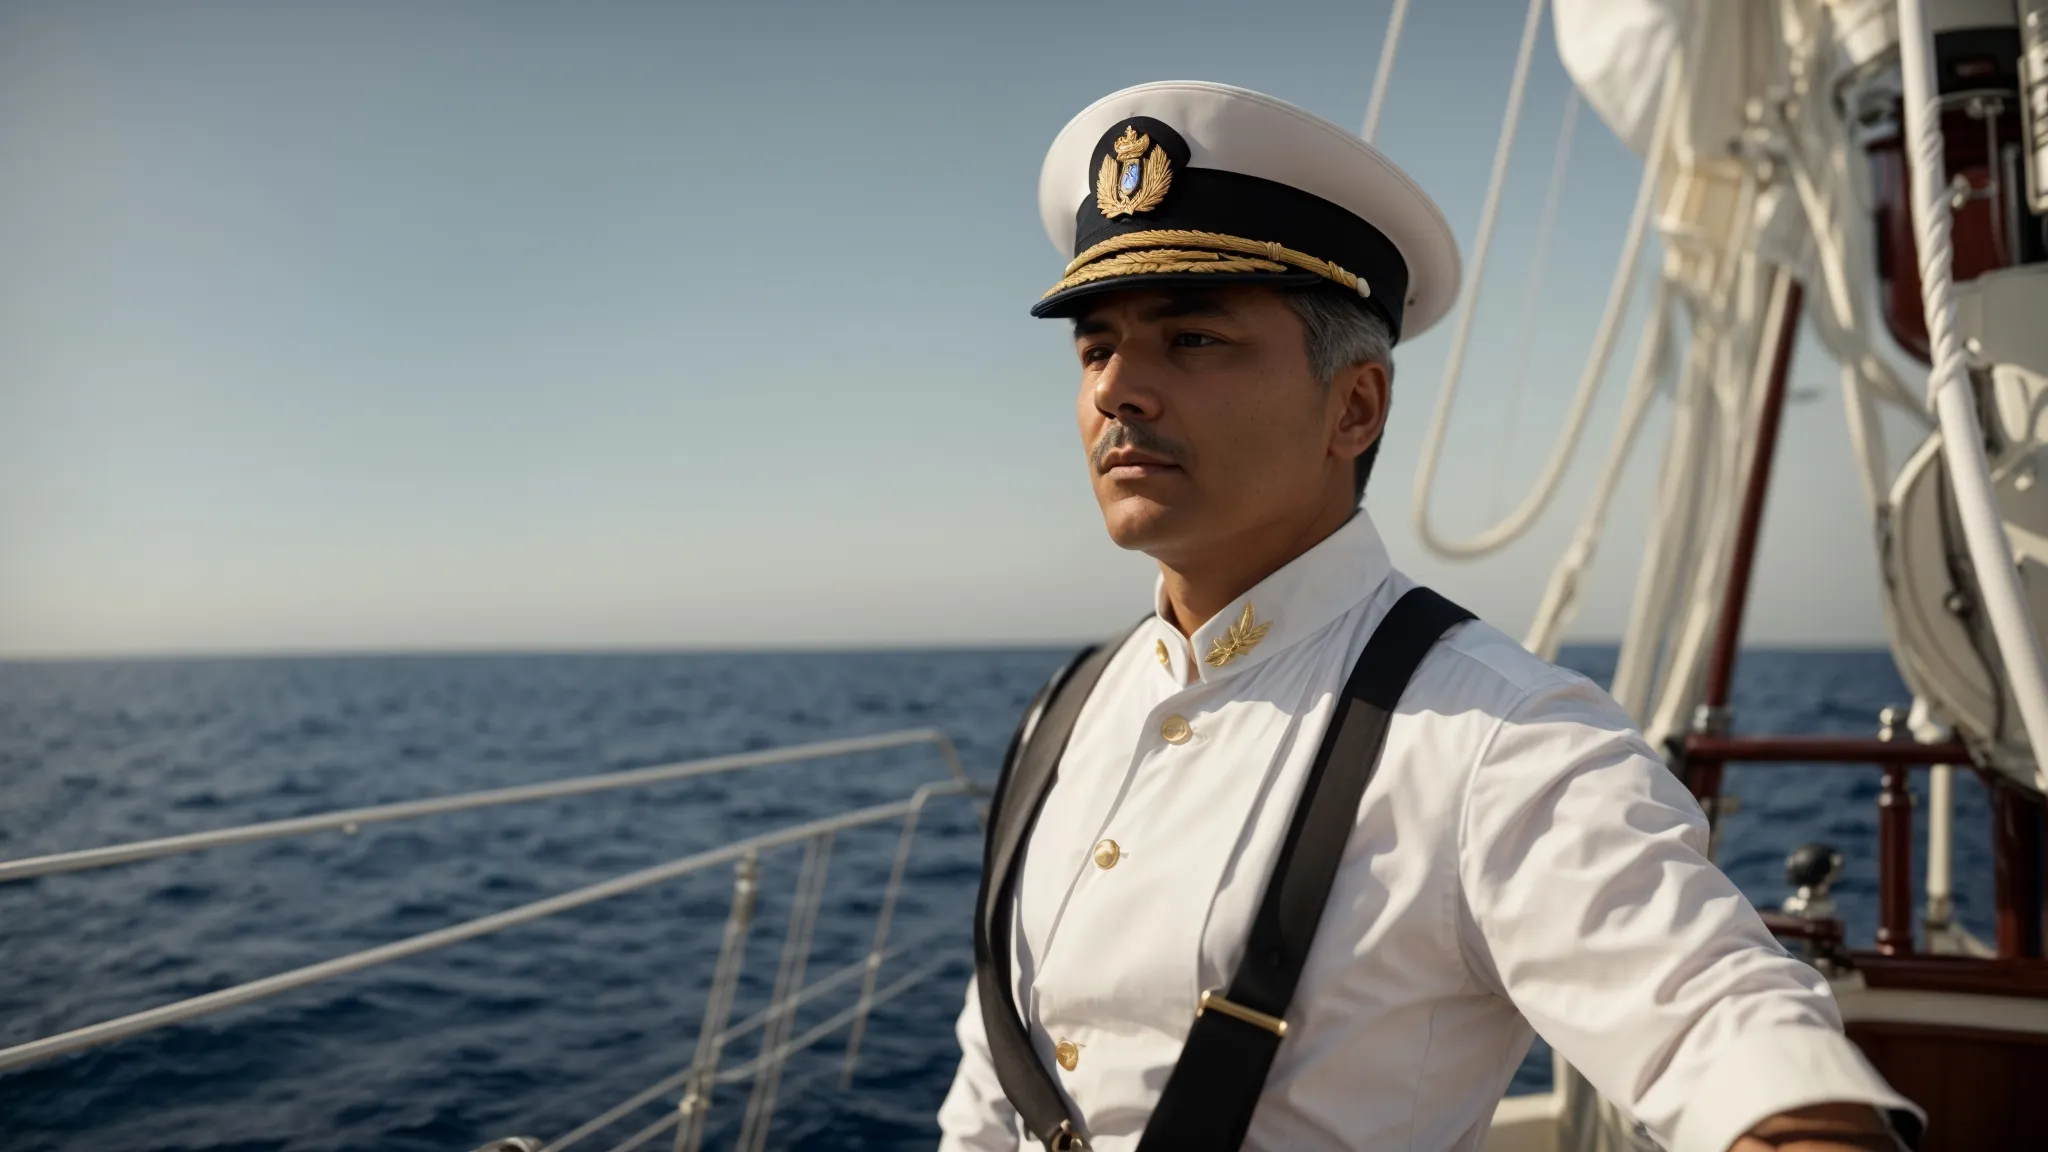 a ship's captain stands at the helm, intently navigating through a vast, open sea under a clear sky.